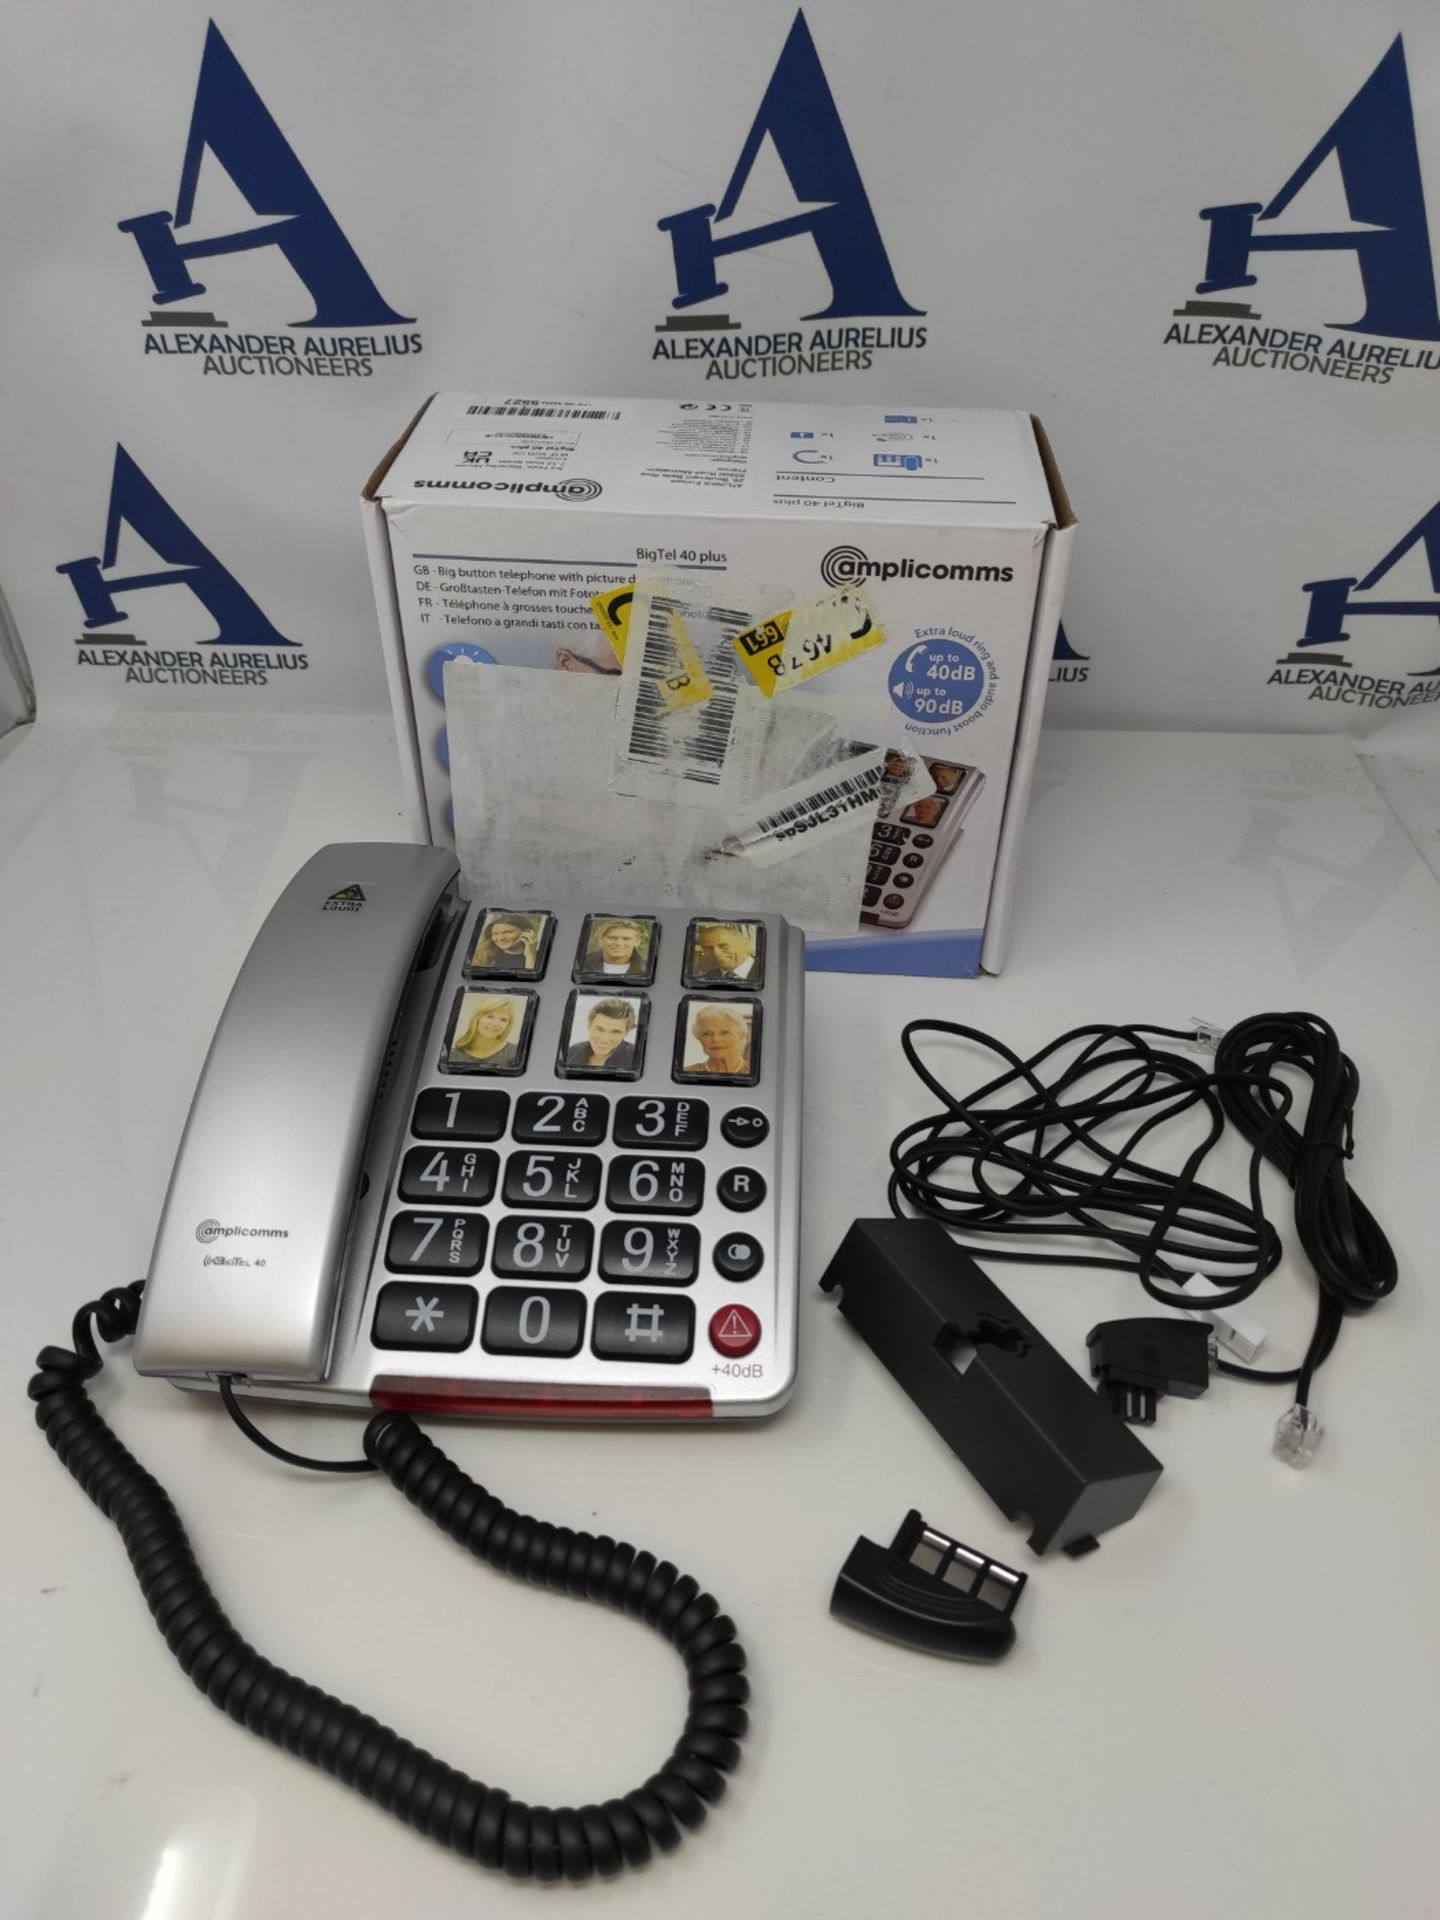 Amplicomms Bigtel 40 - Big Button Phone for Elderly - Loud Phones for Hard of Hearing - Image 2 of 2